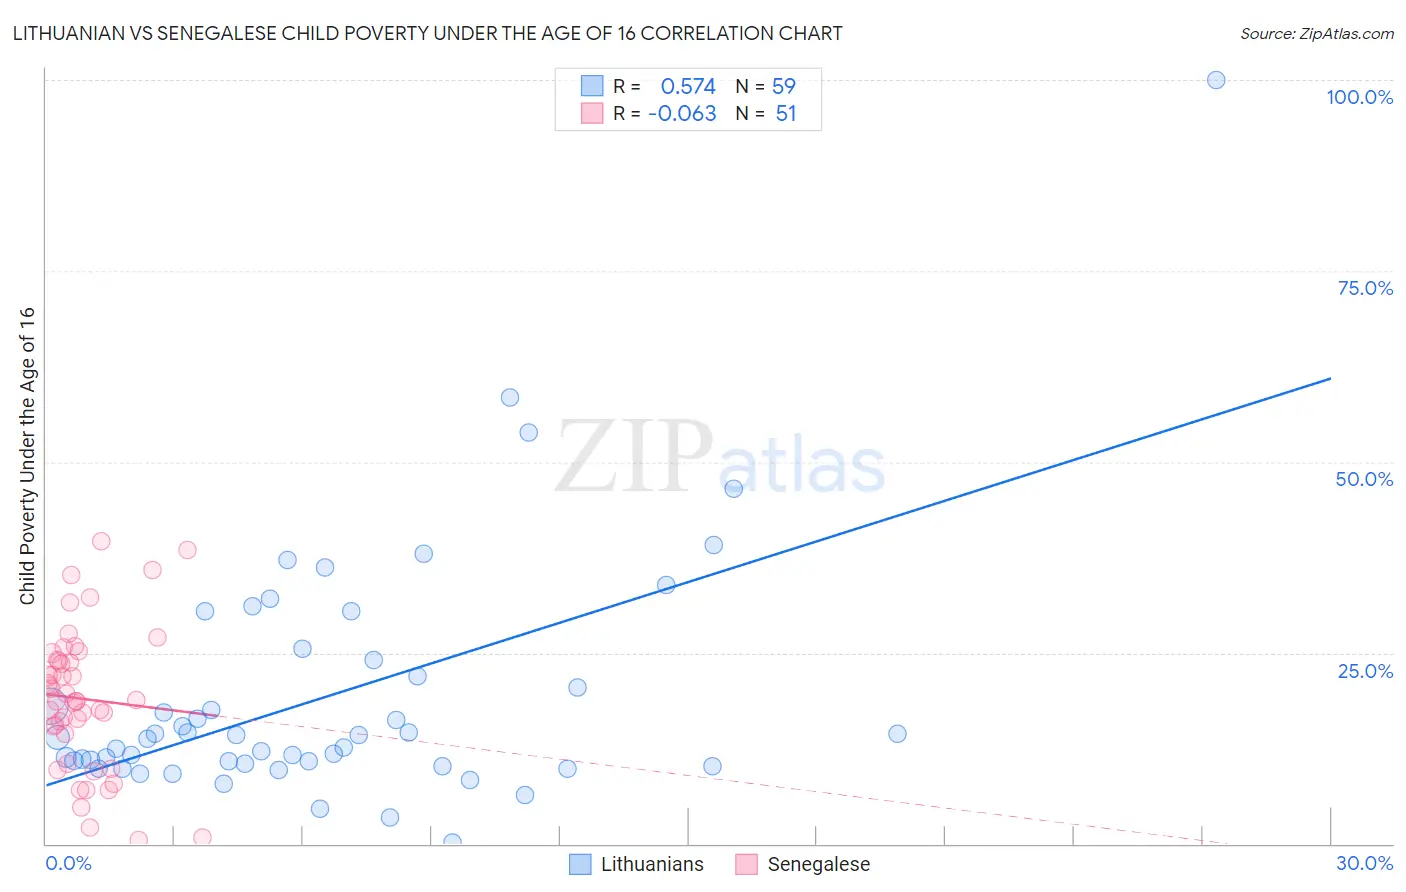 Lithuanian vs Senegalese Child Poverty Under the Age of 16